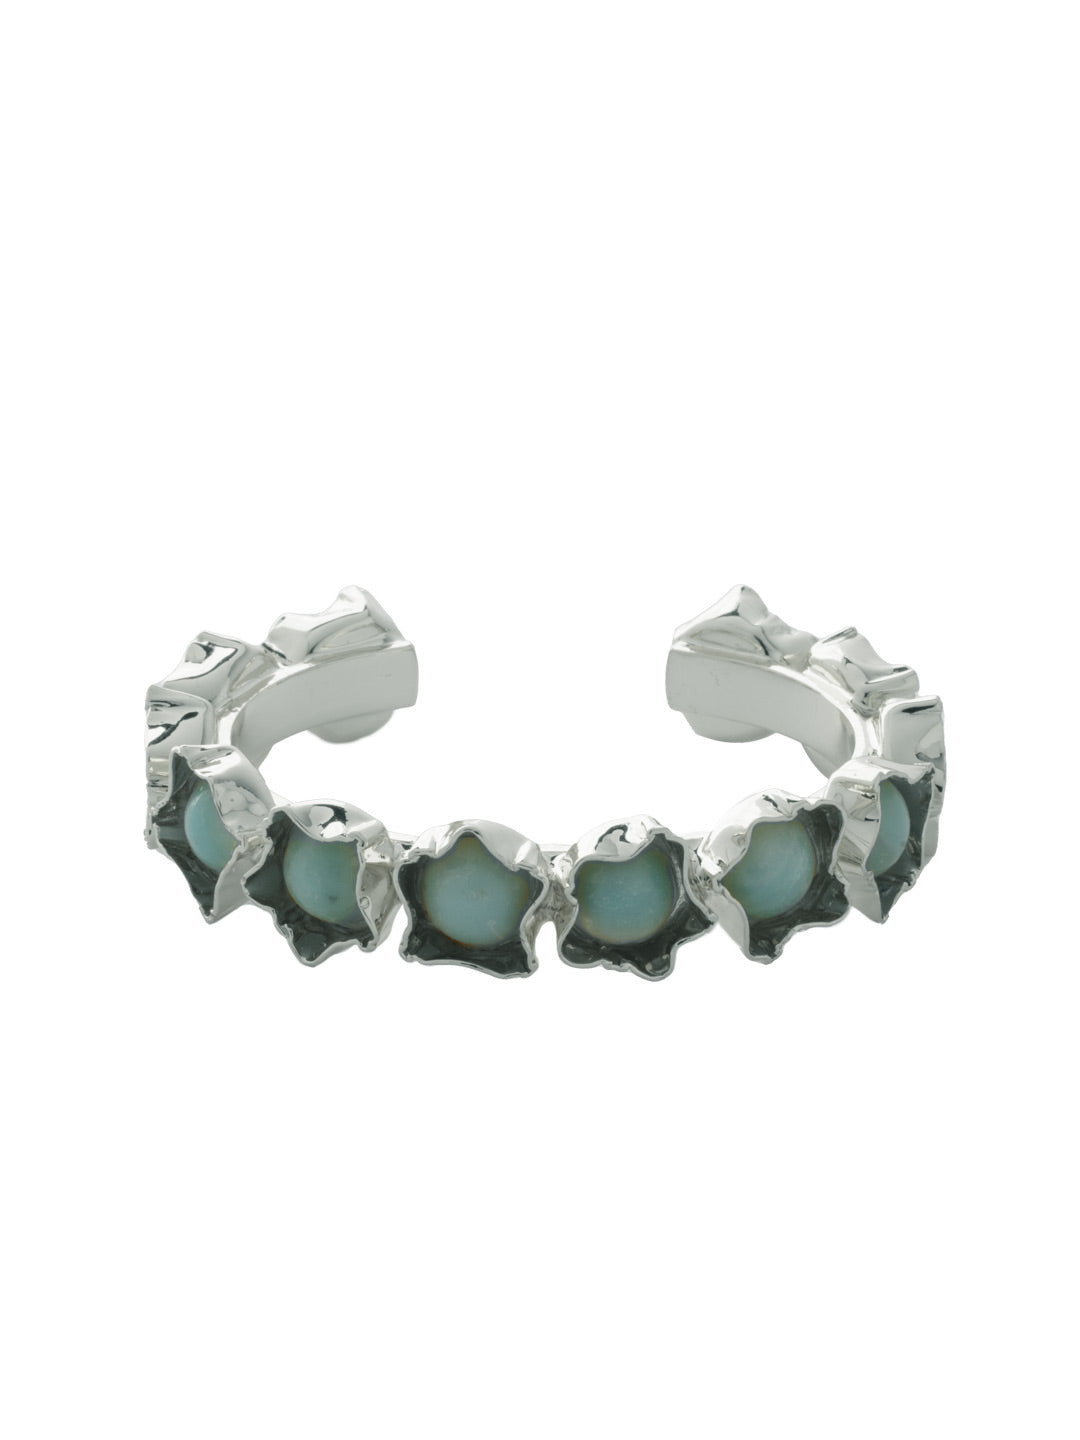 Karie Cuff Bracelet - 4BFJ10PDAES - <p>The Karie Cuff Bracelet features semi-precious stones set in a ruffle metal bezel on an adjustable metal band. From Sorrelli's Aegean Sea collection in our Palladium finish.</p>